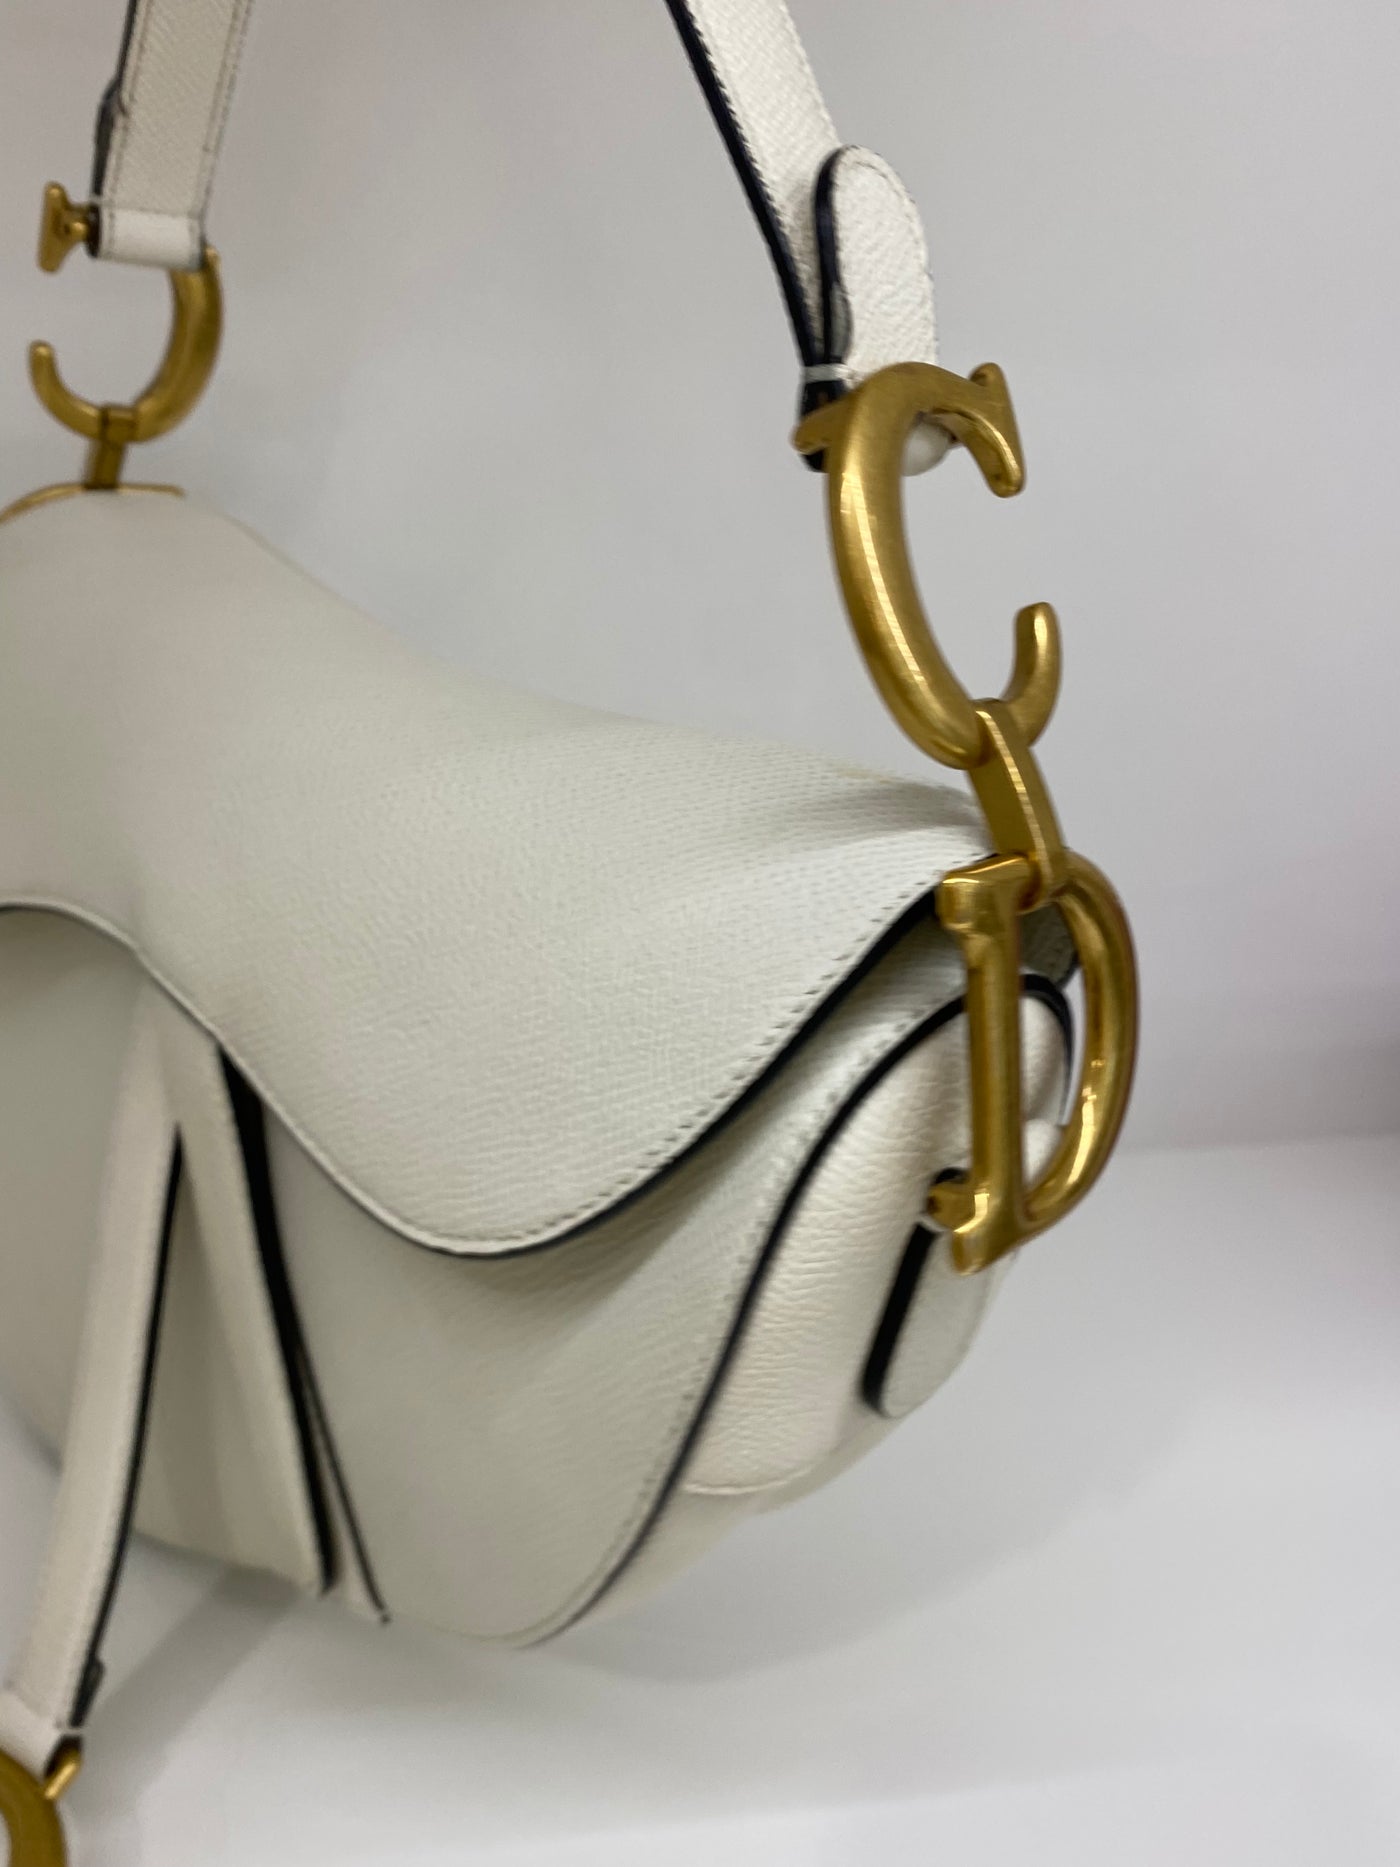 Dior Saddle Off White With Strap